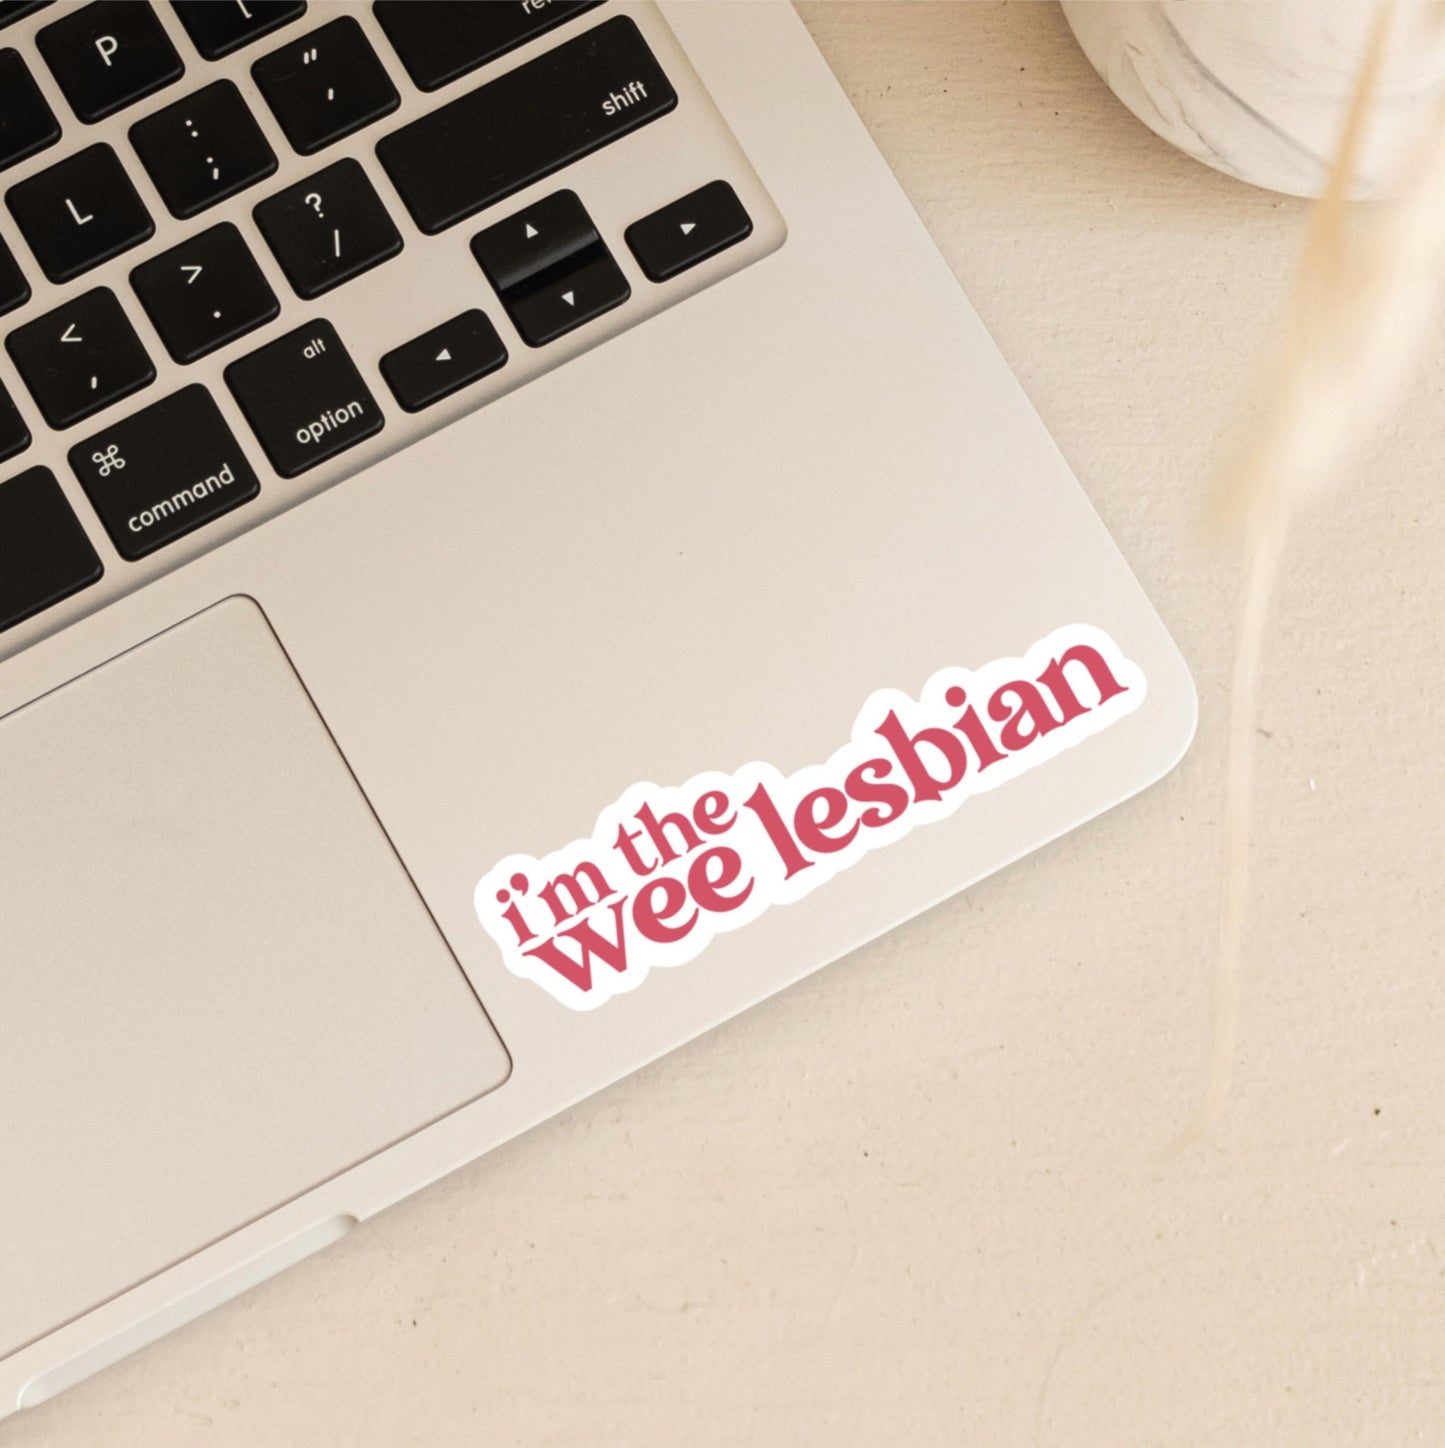 I'm the Wee Lesbian! | Clare | Derry Girls Stickers